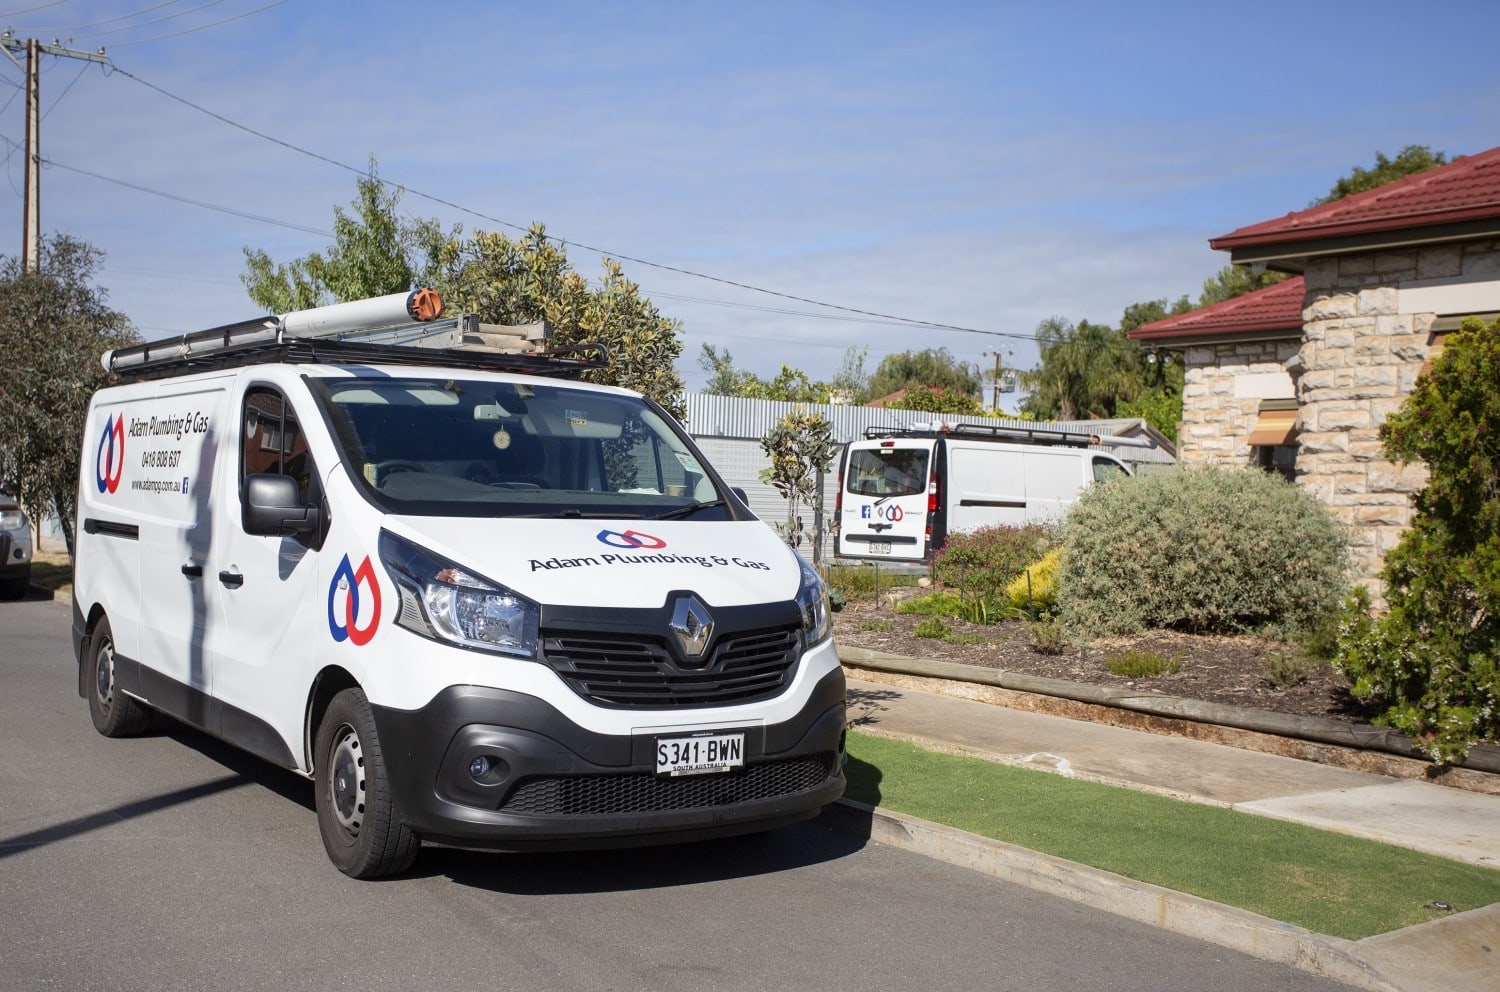 The plumbers preferred by Adelaide property managers